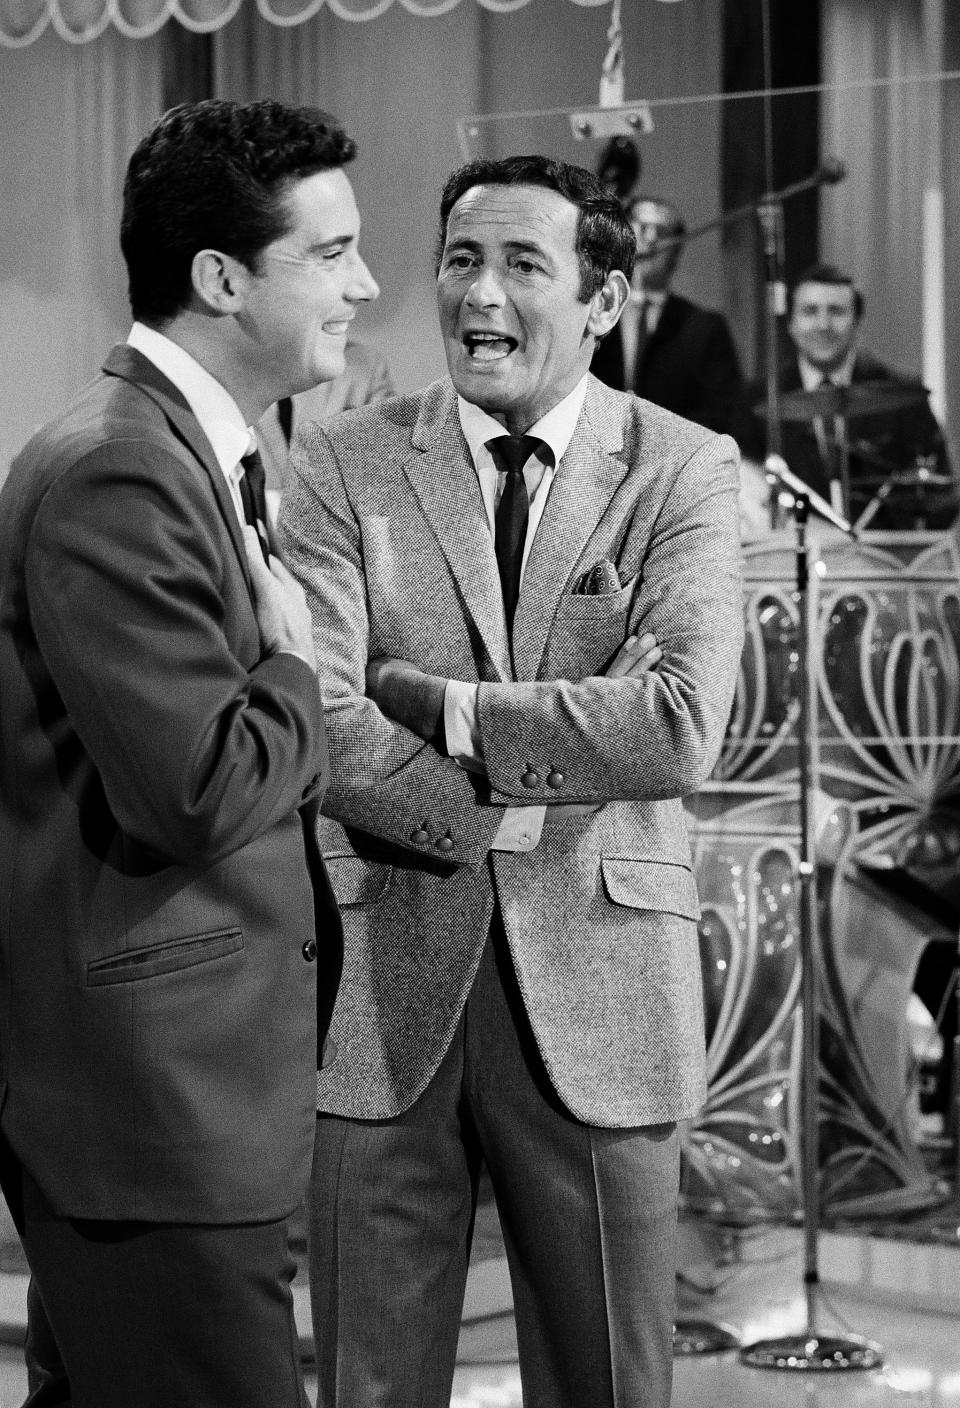 FILE - In this Sept. 15, 1967 file photo, Regis Philbin, of "The Joey Bishop Show" goes over the upcoming routines with Joey Bishop, right, on the set of the ABC-TV studio inLos Angeles. Philbin, the genial host who shared his life with television viewers over morning coffee for decades and helped himself and some fans strike it rich with the game show “Who Wants to Be a Millionaire,” has died on Friday, July 24, 2020. (AP Photo, file)